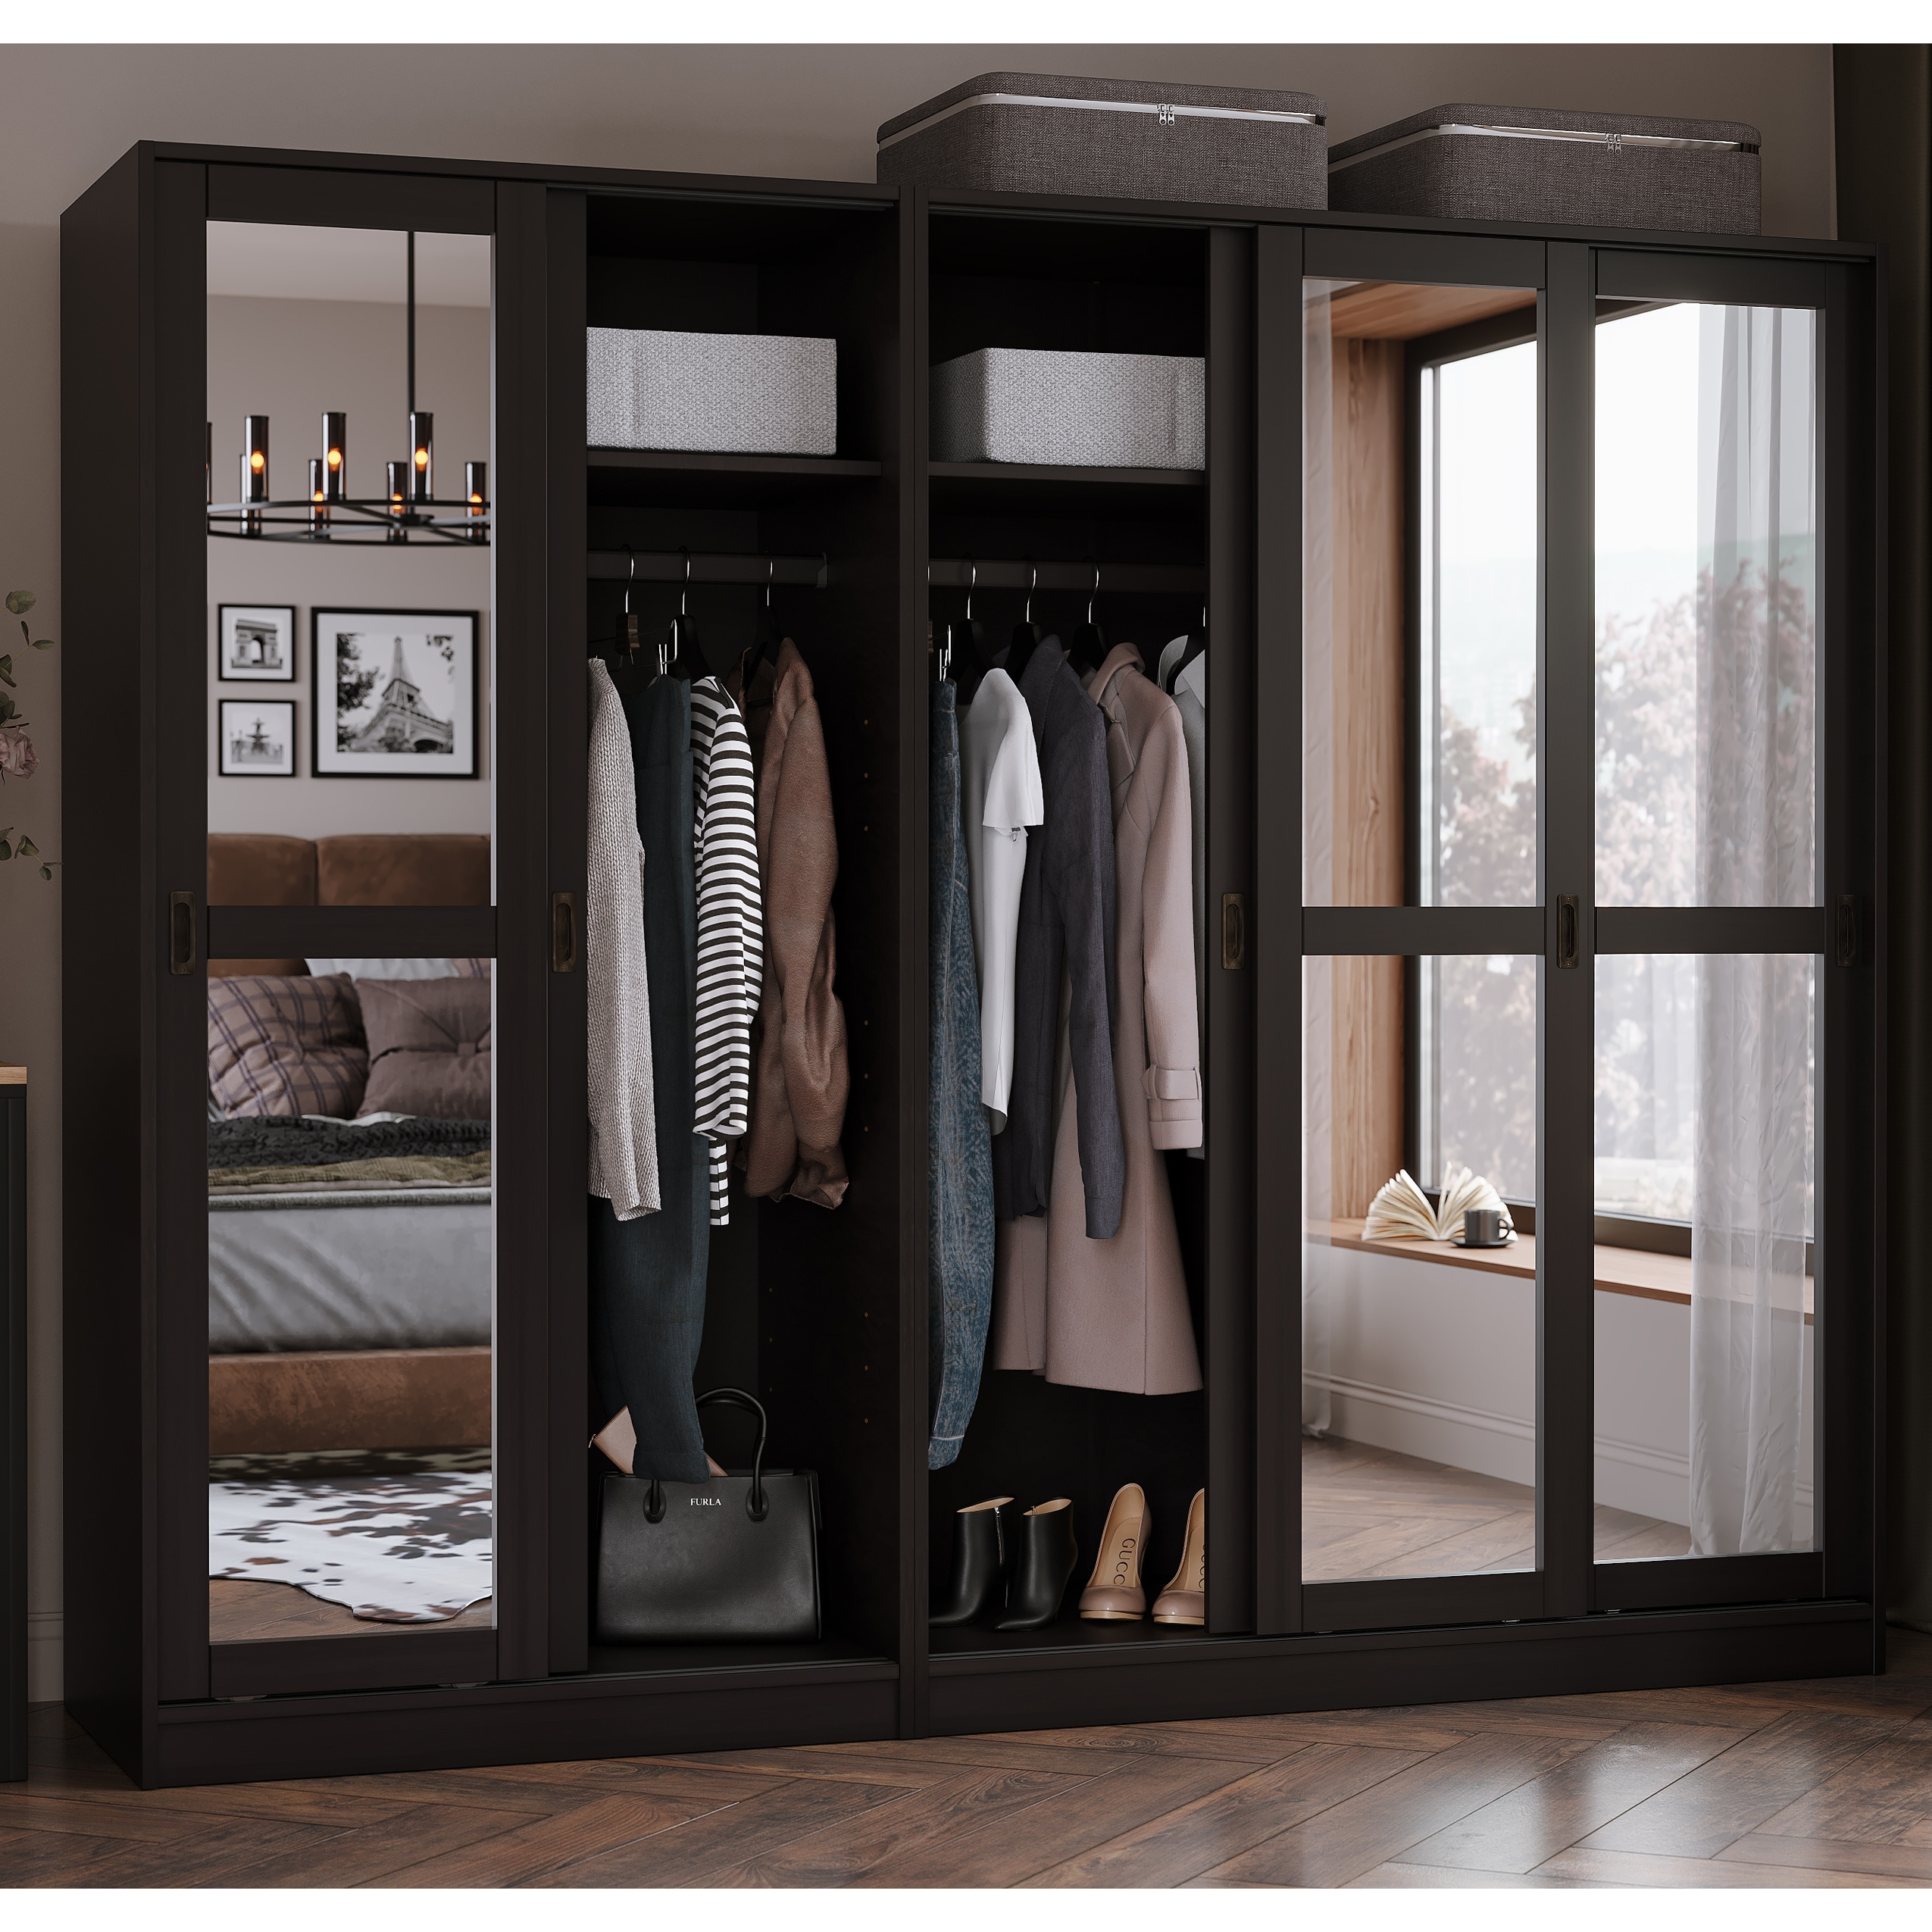 Palace Imports 100% Solid Wood Wall Closet System of Wardrobe Armoires with Mirrored, Louvered or Raised Panel Sliding Doors - 88-Java-Mirrored